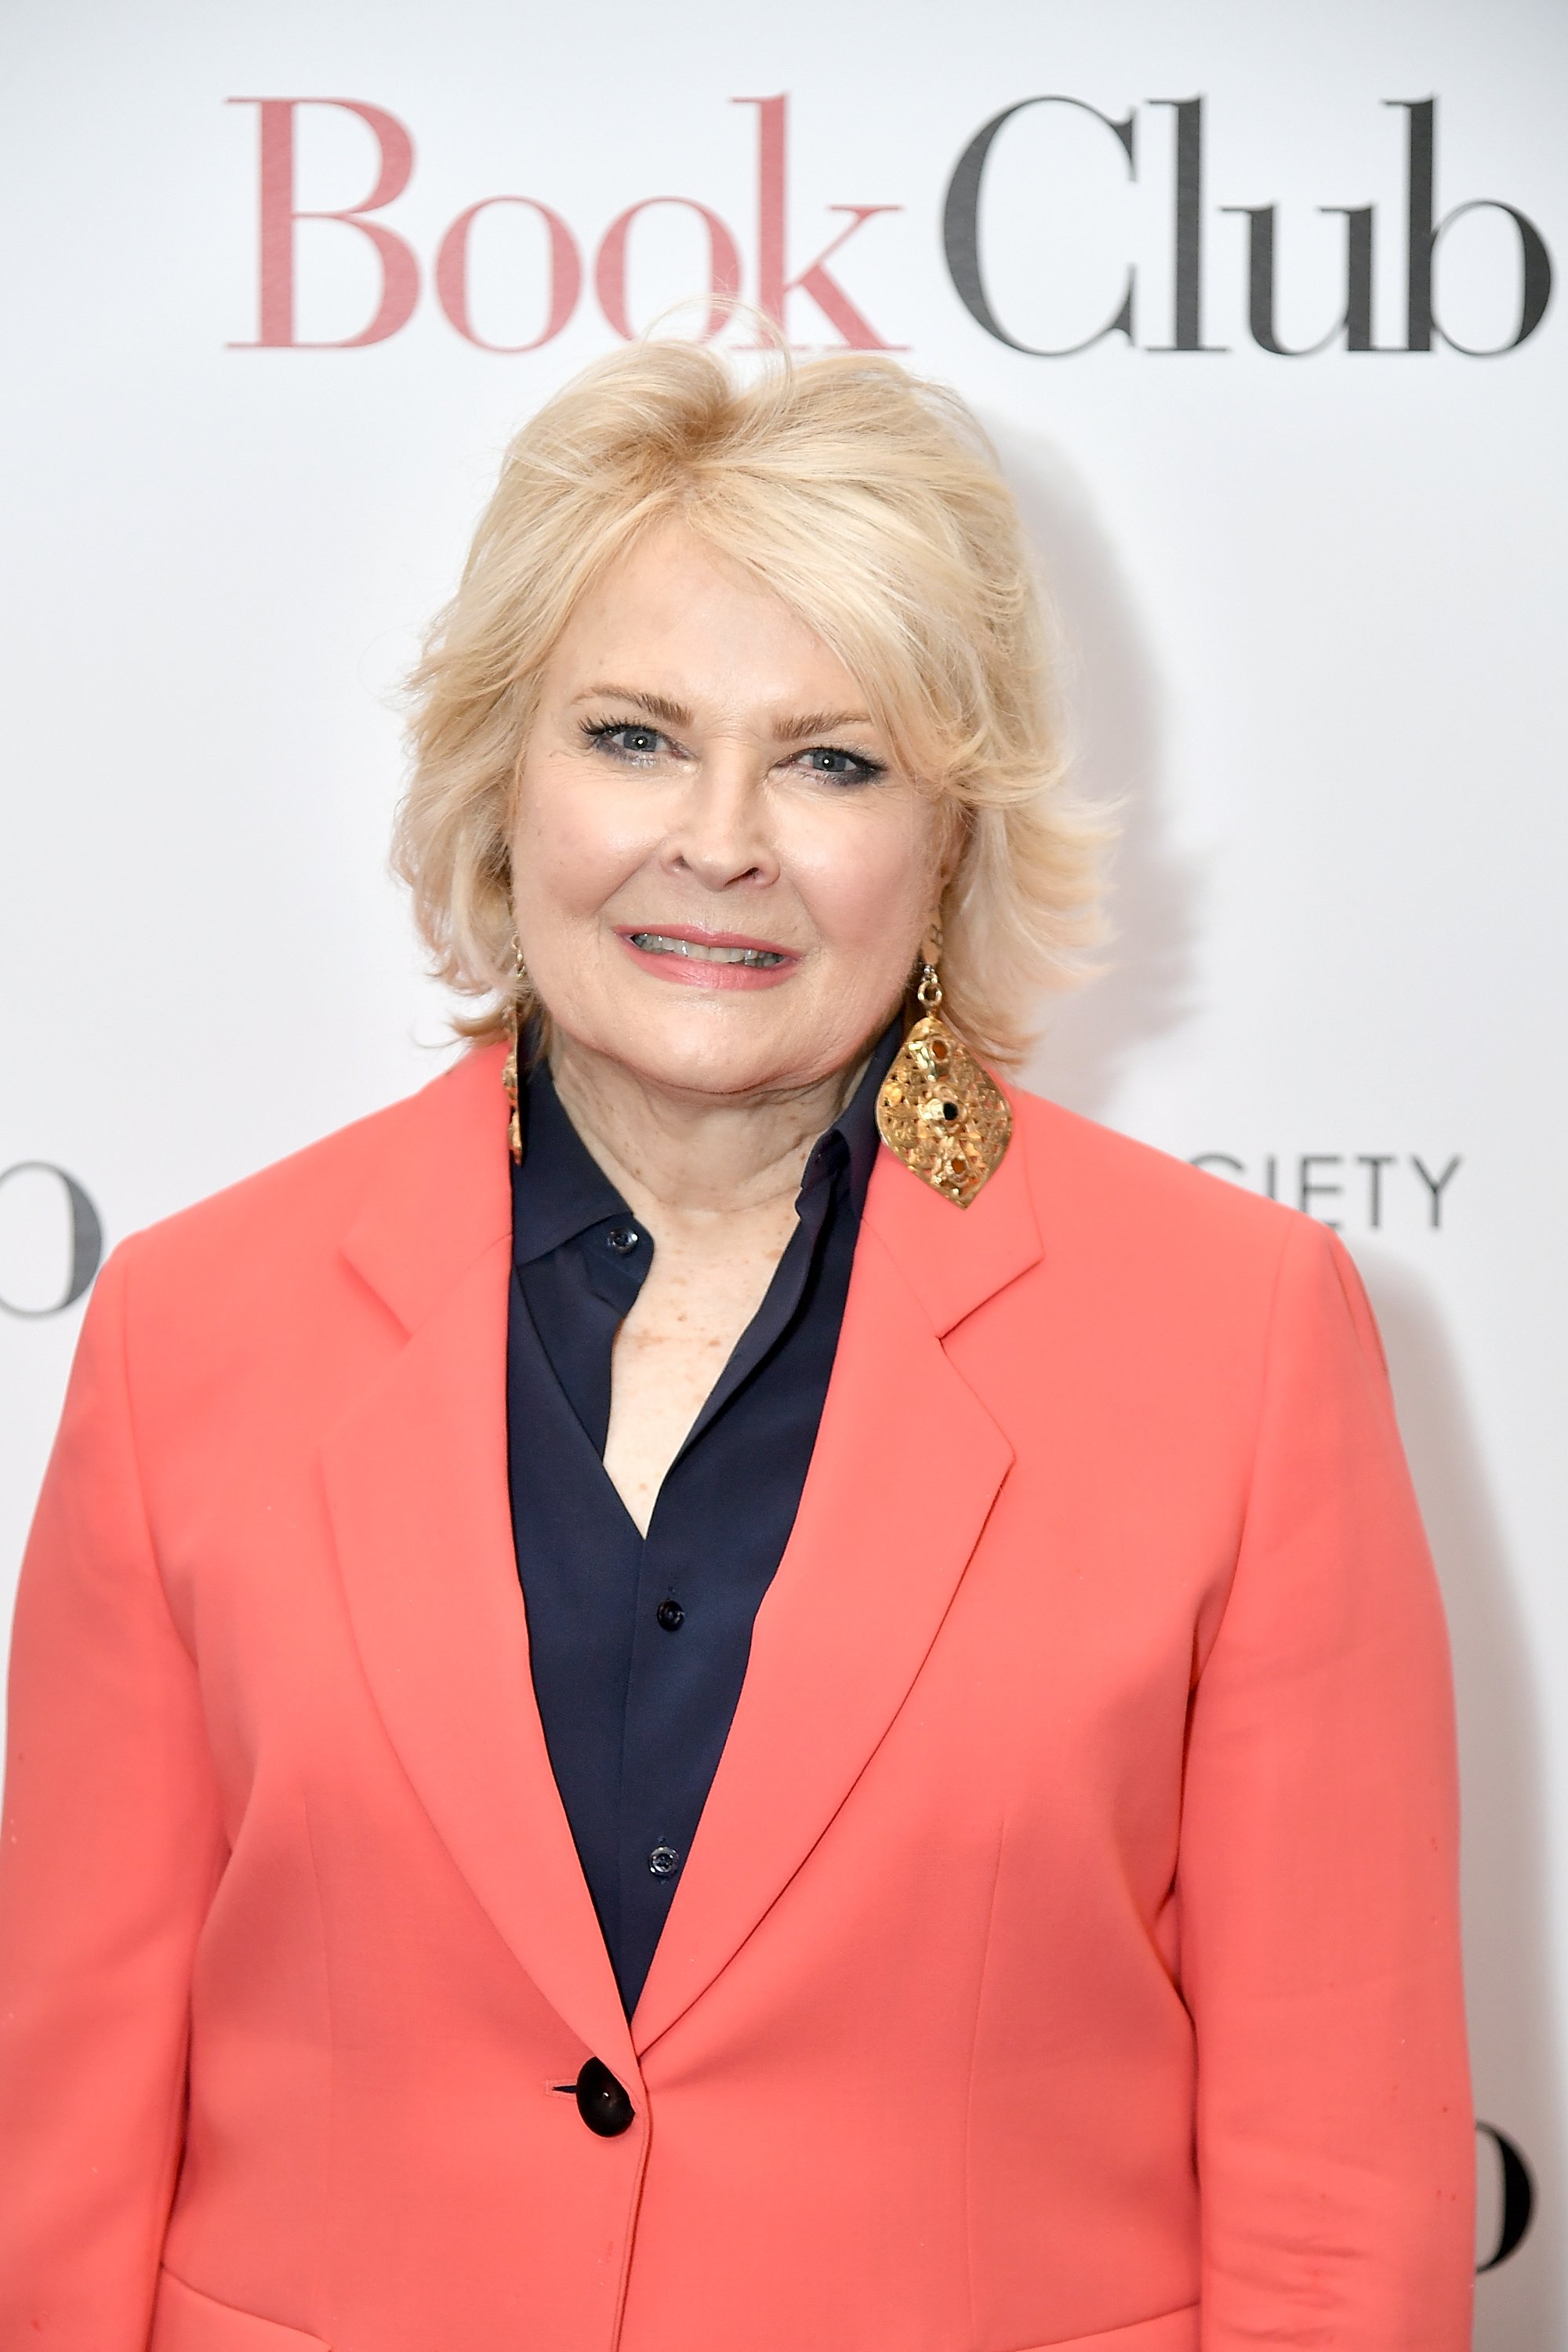 Candice Bergen appears at the New York screening of 'Book Club' in 2018